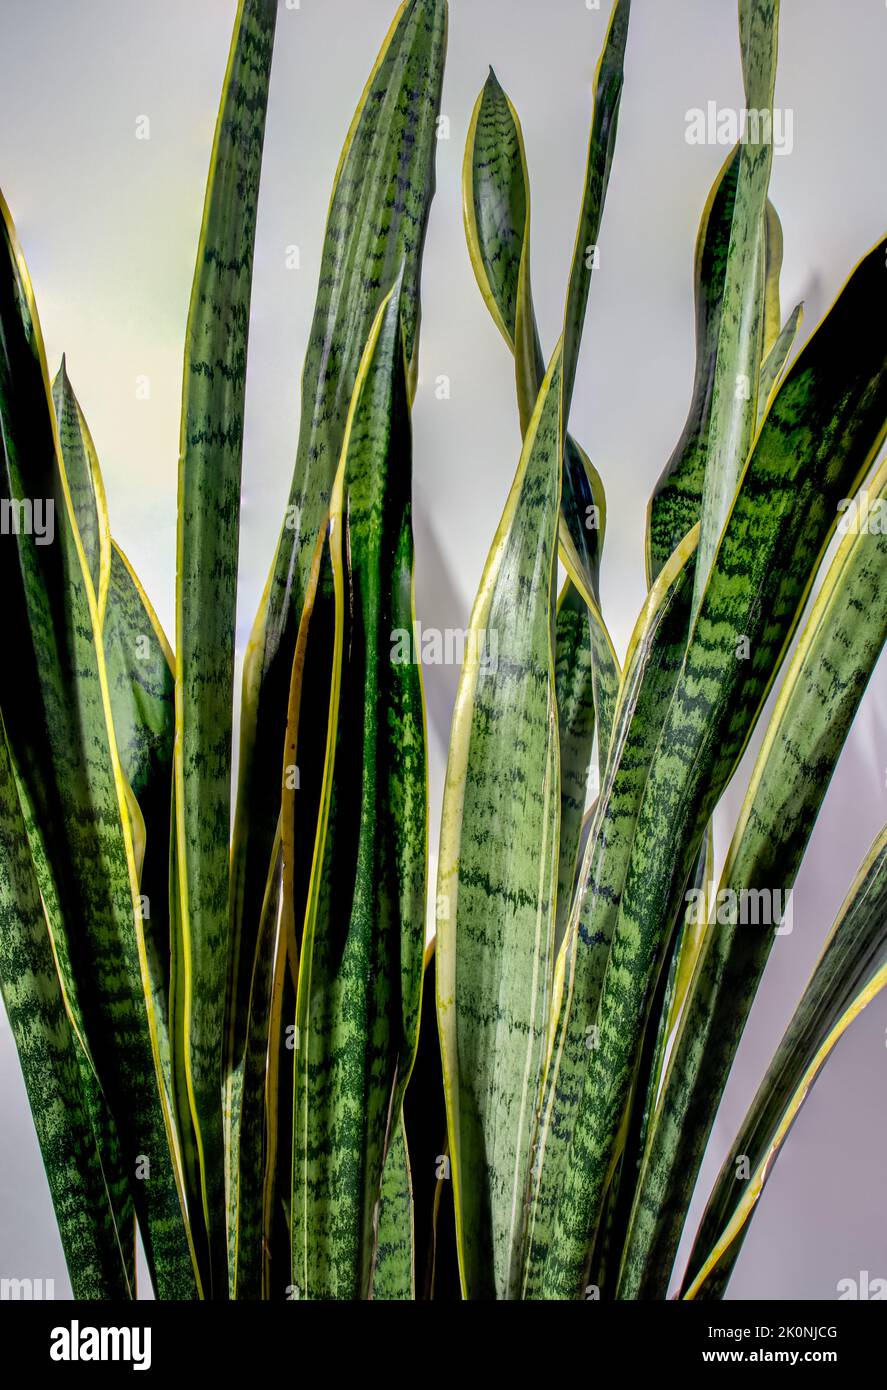 Long green and yellow sword like leaves of a snake plant with a neutral background Stock Photo